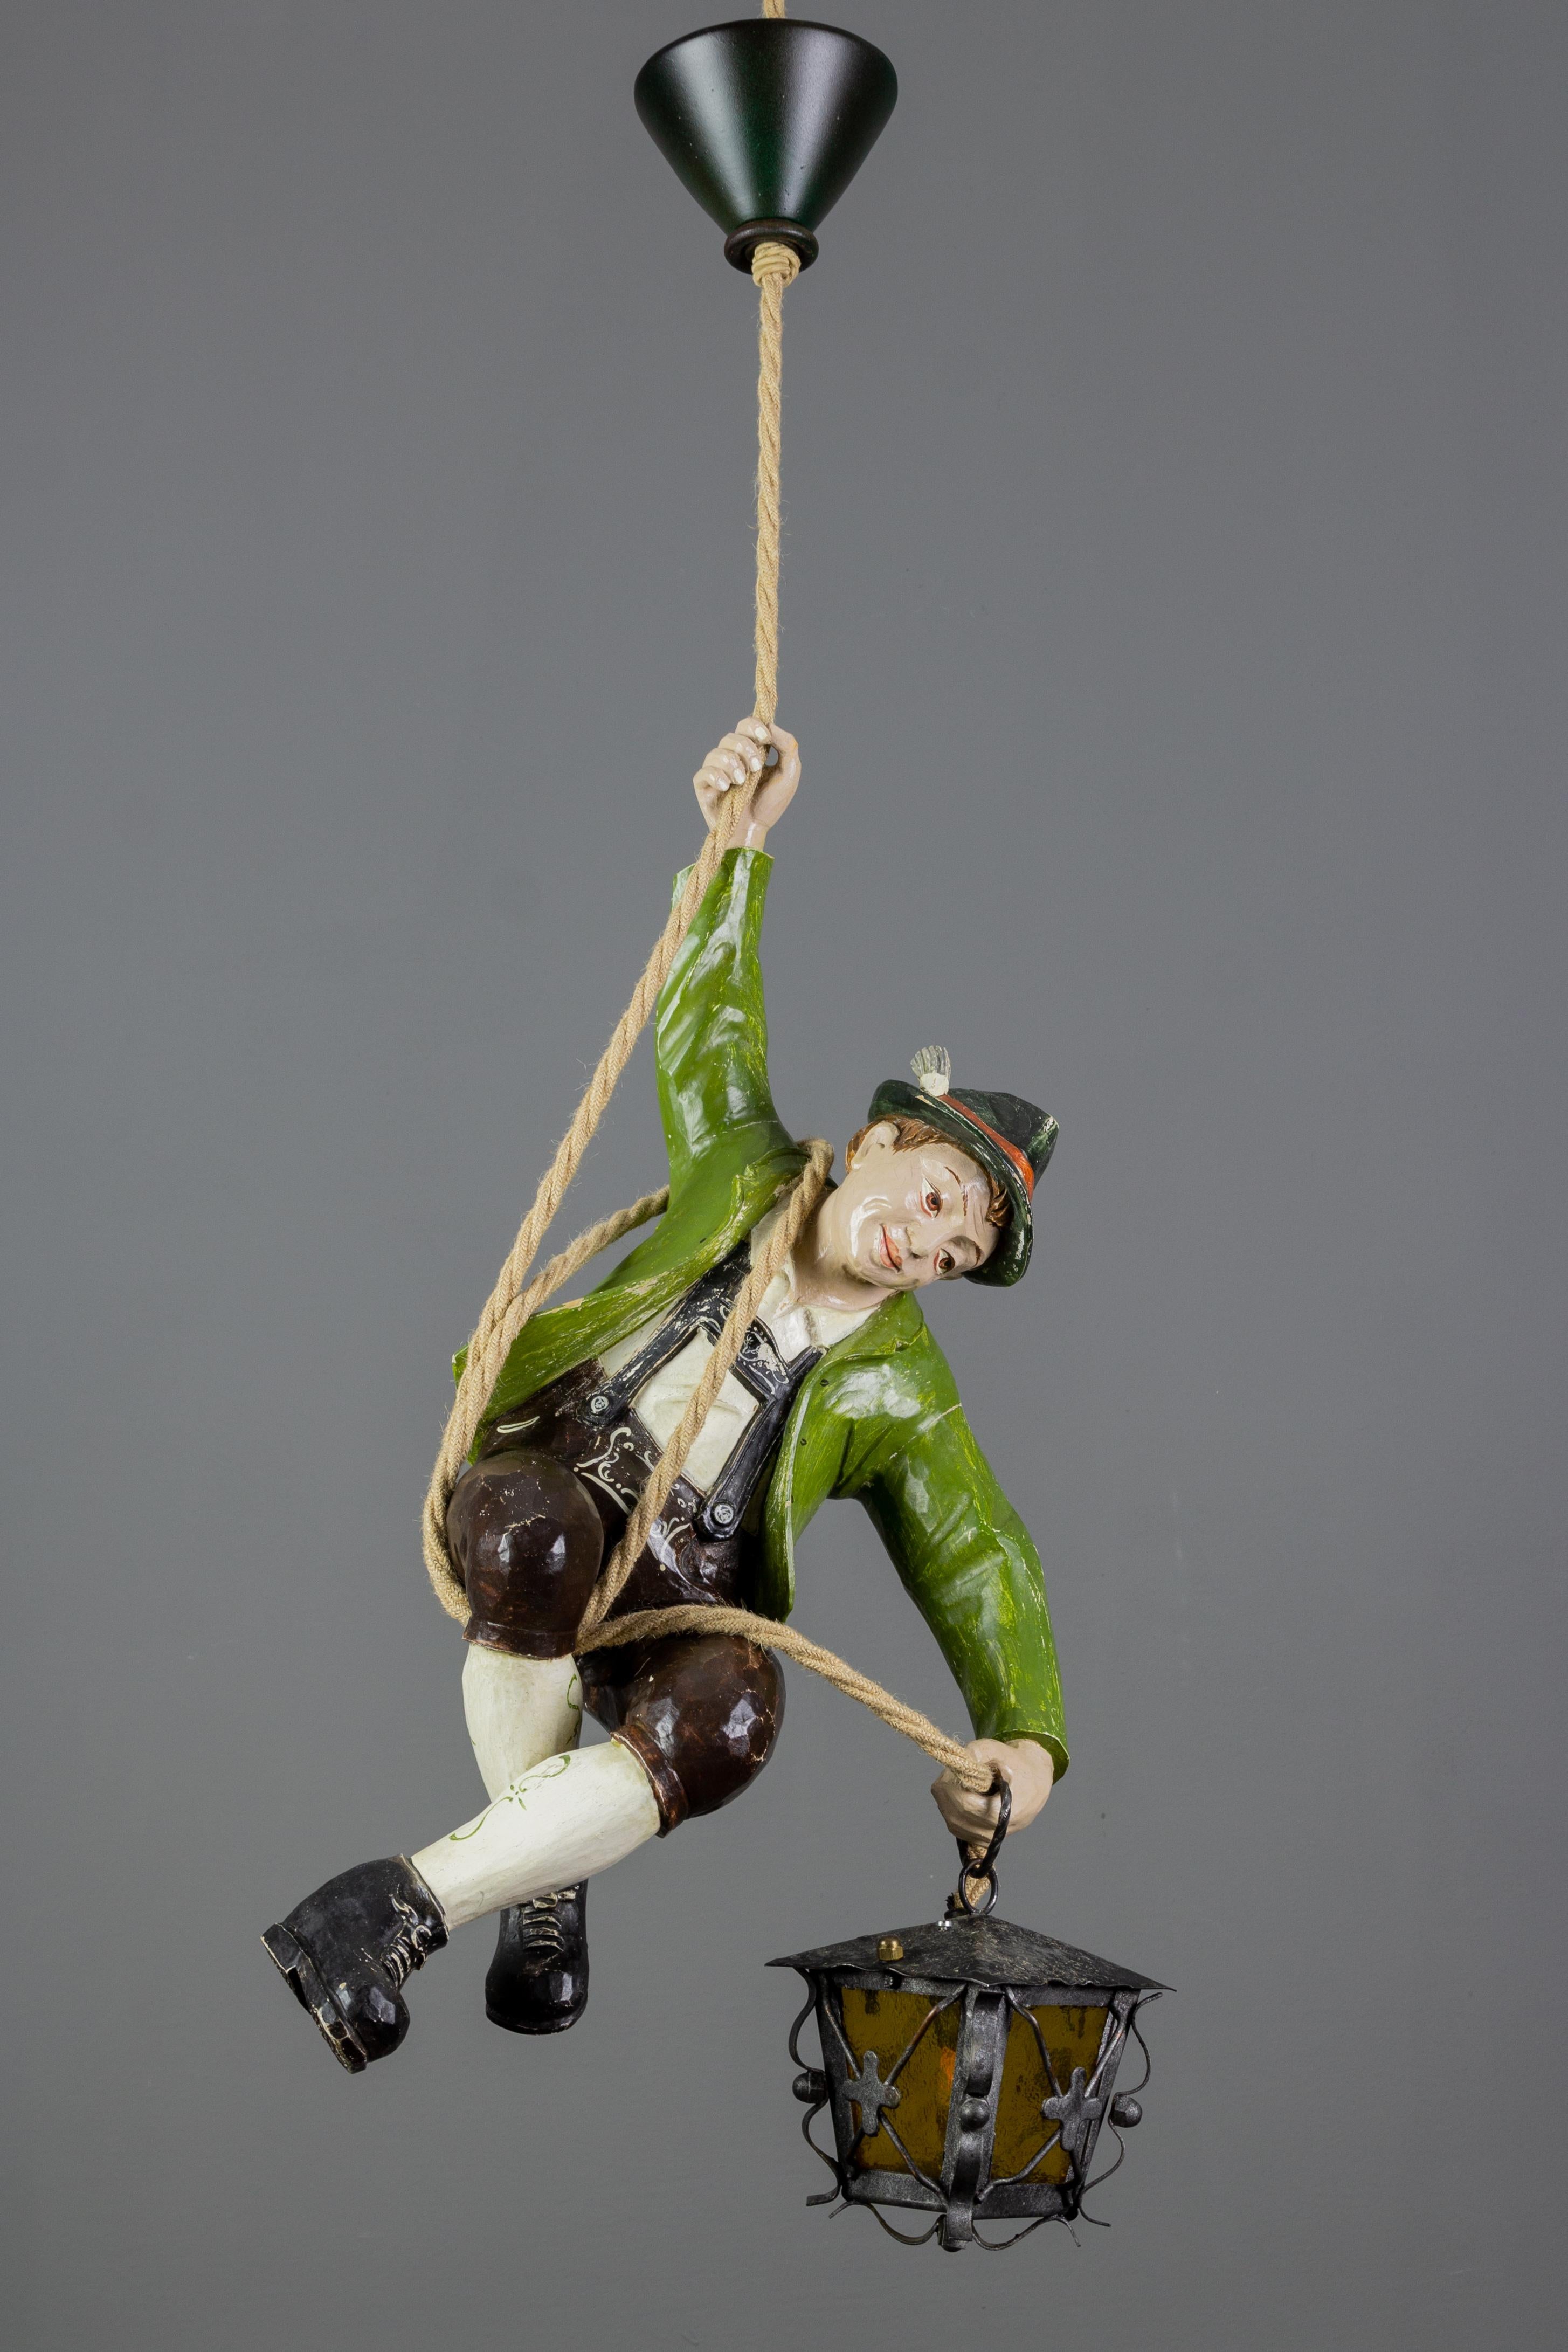 The wonderful German pendant light features a hand-carved figure of a mountain climber in beautifully hand-painted Bavarian traditional clothing in green, black, white, and red colors. The detailed carved wooden mountaineer wears a hat and is